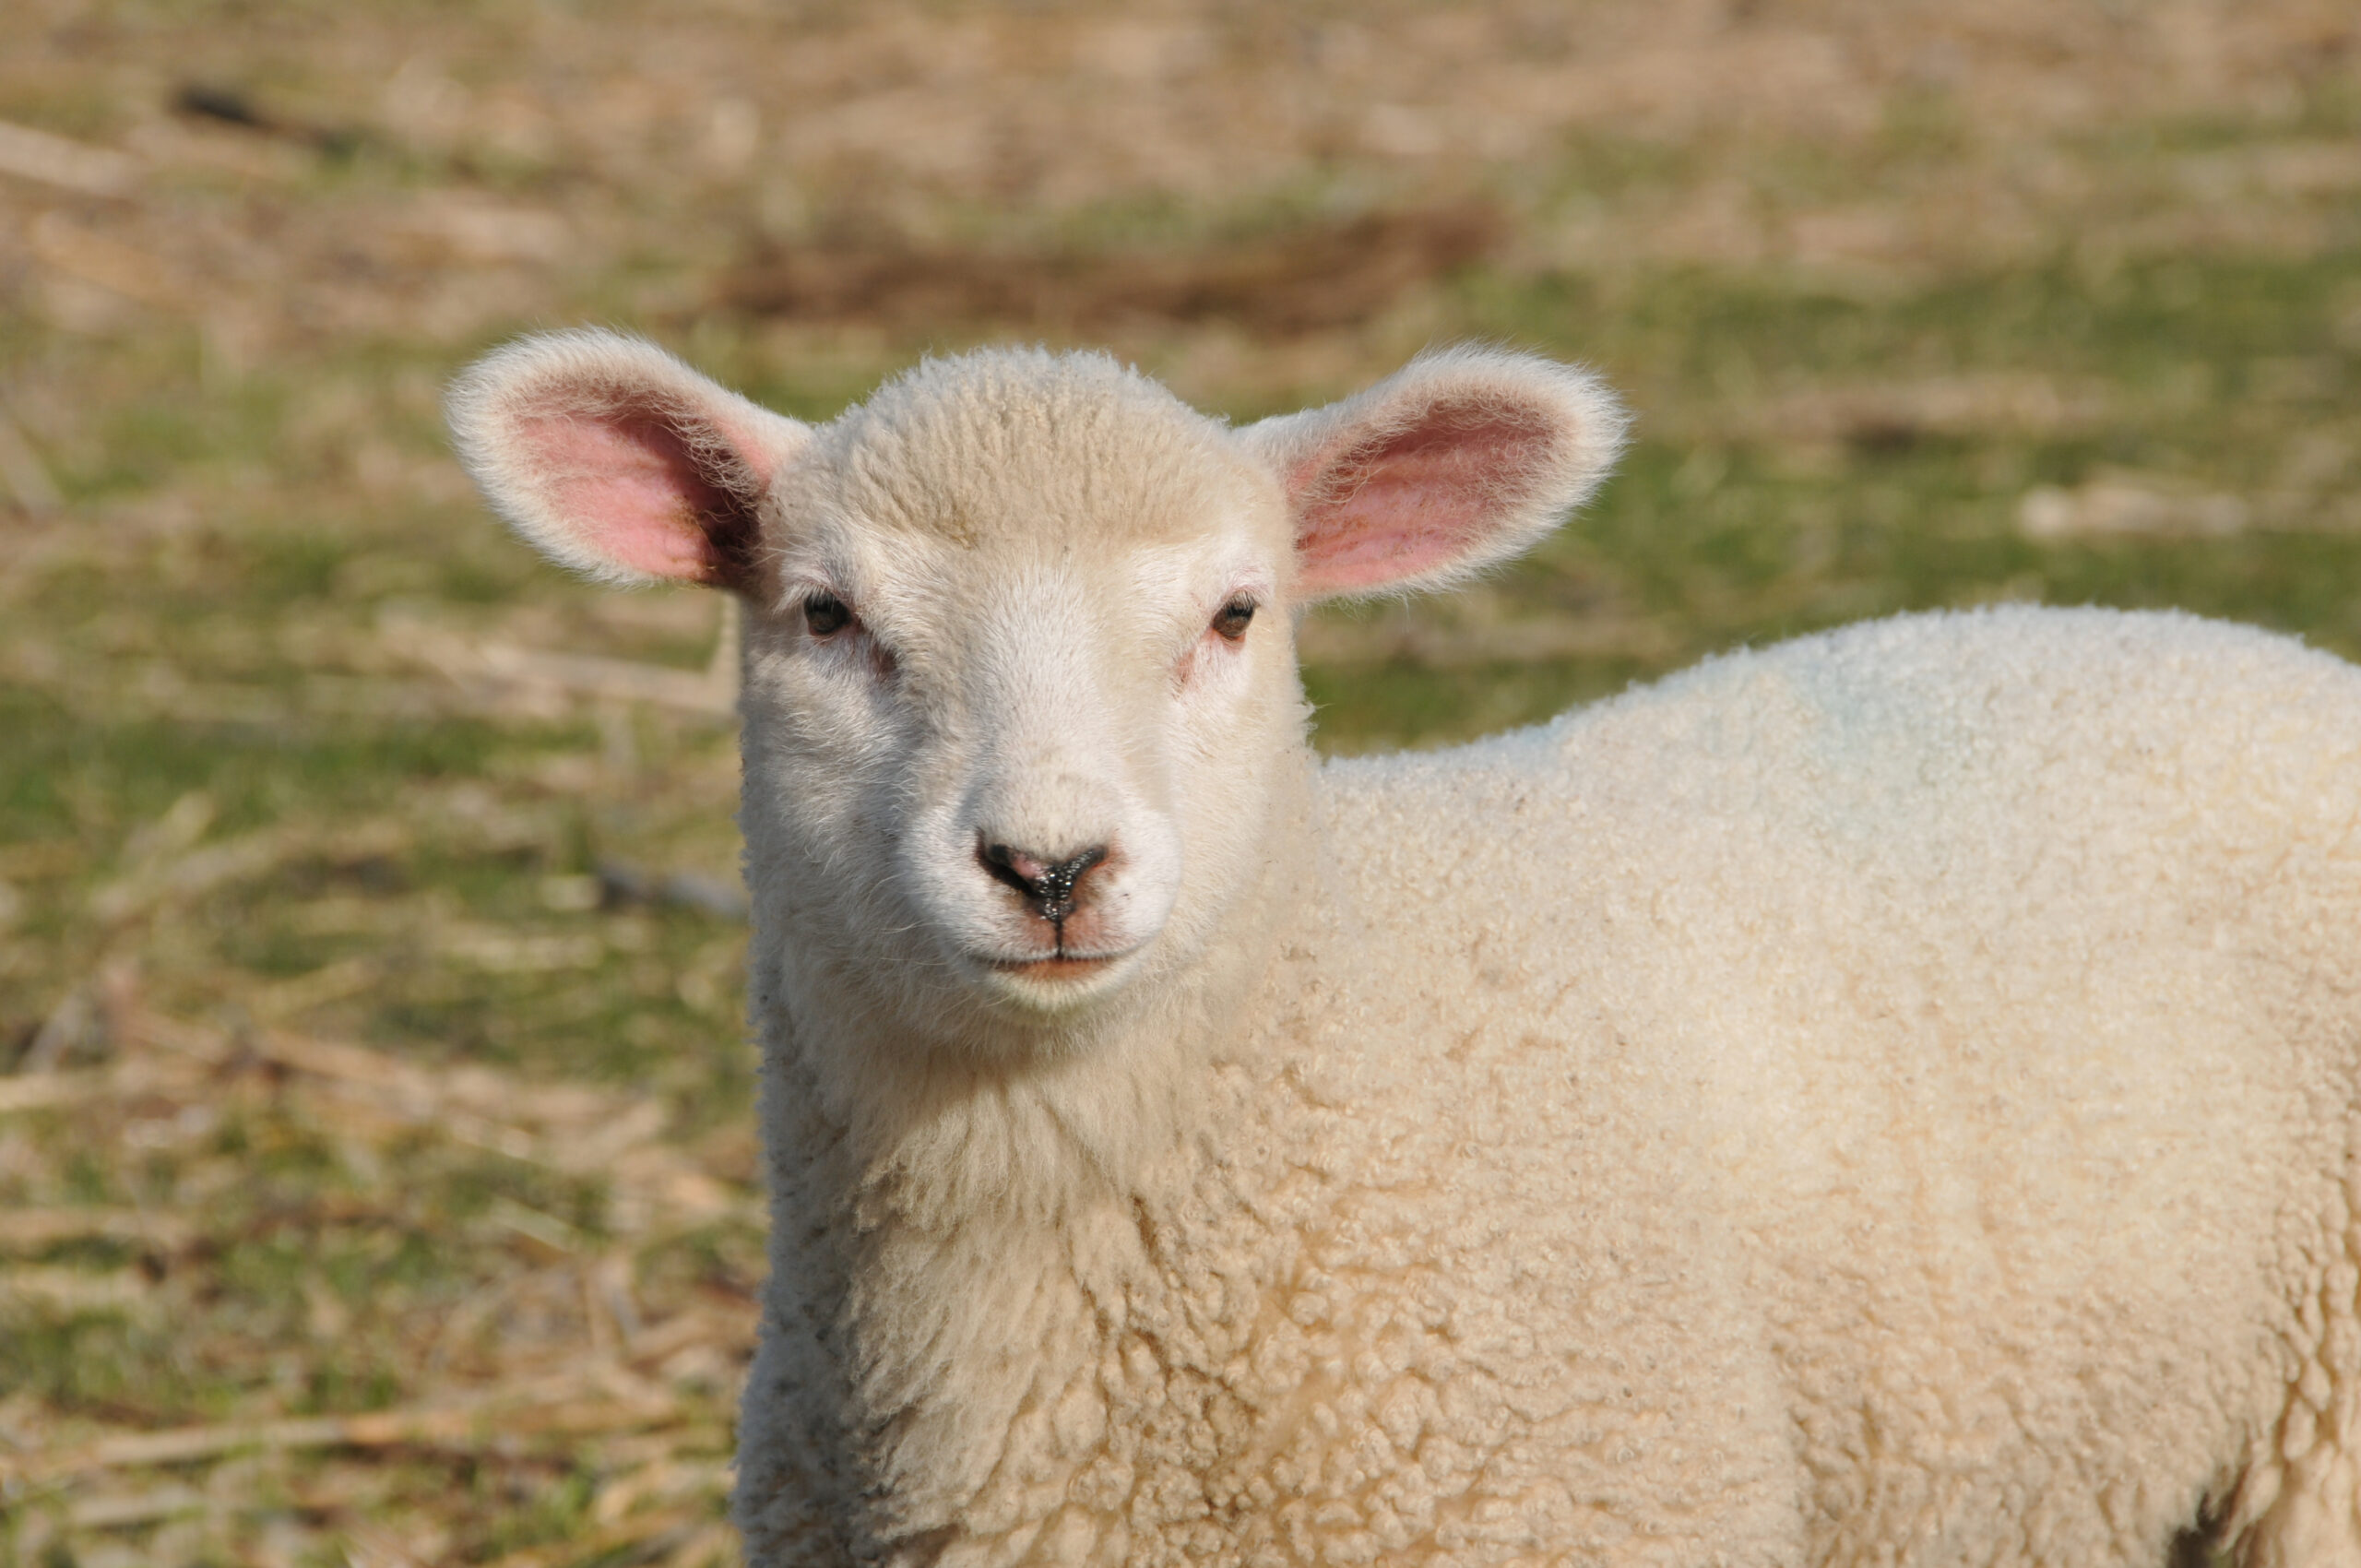 A young weaner lamb